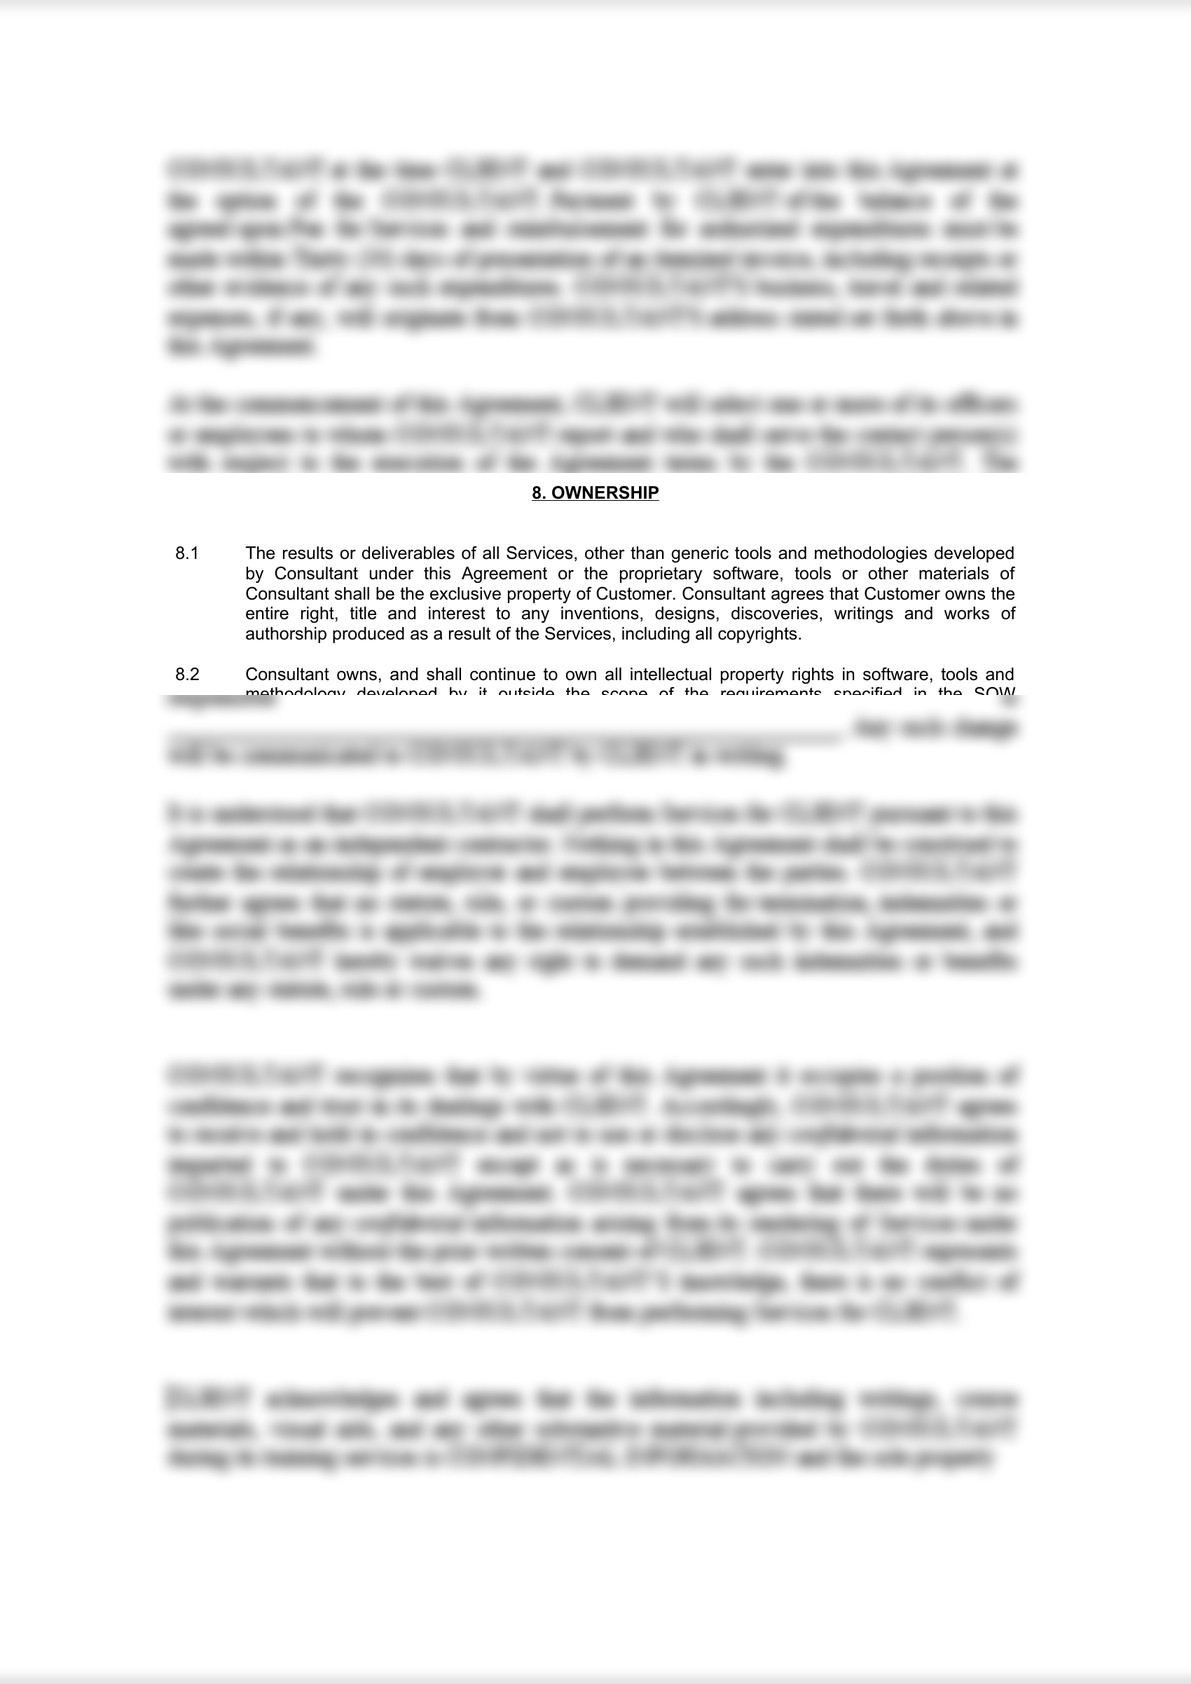 Consultancy Agreement for IT Services-5